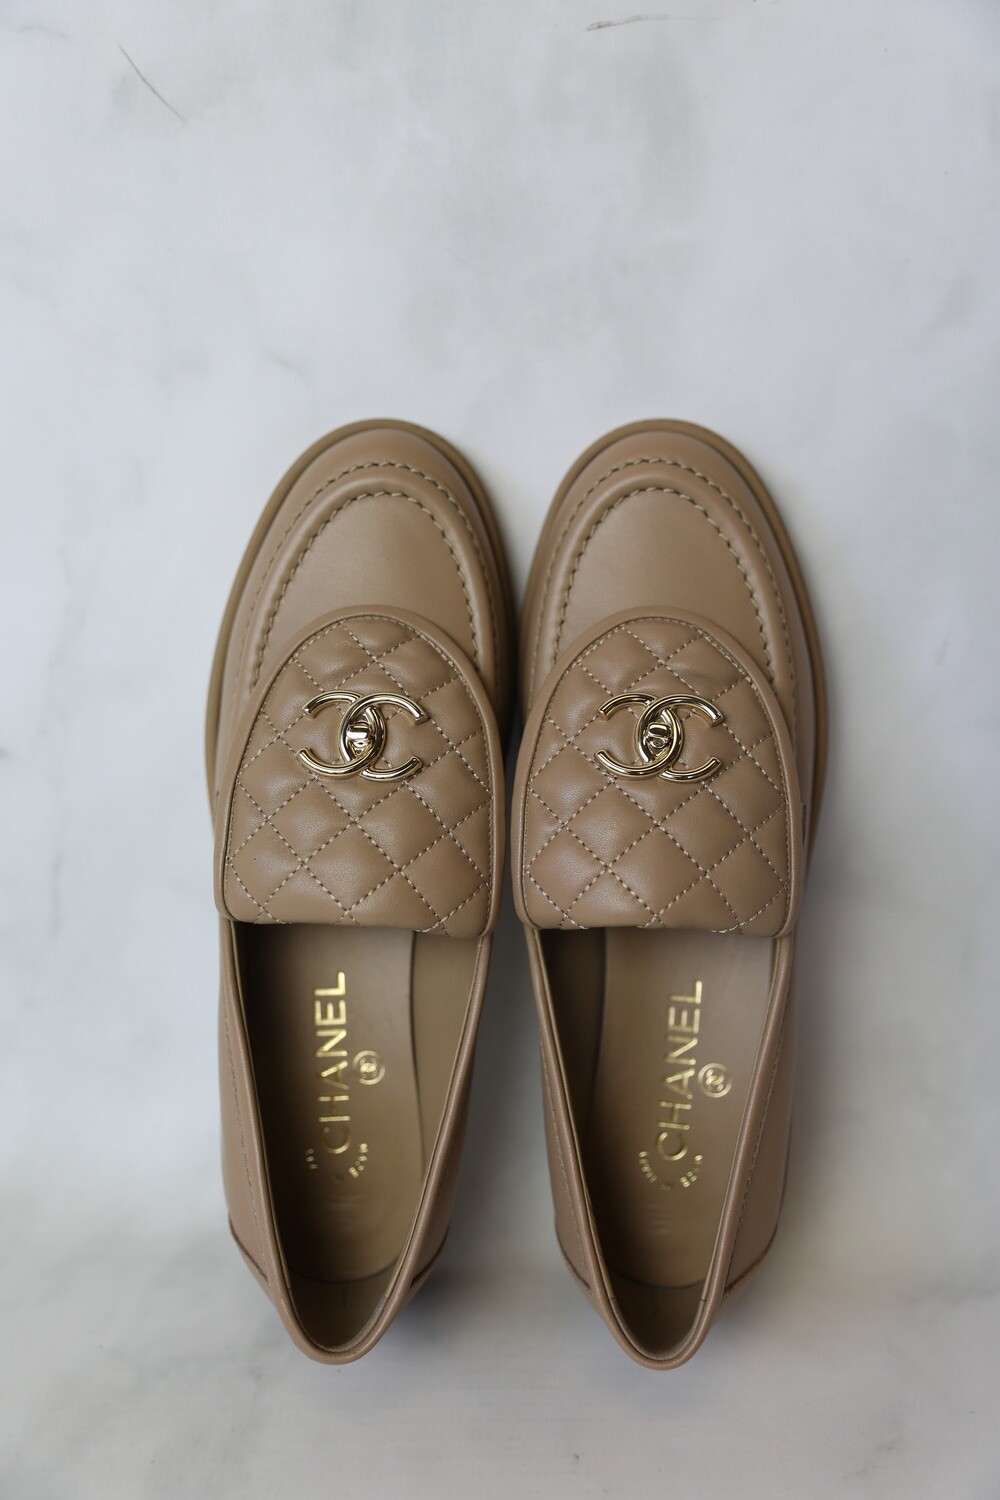 Chanel Shoes Turnlock Loafers, Biege, Size 37.5, New in Box